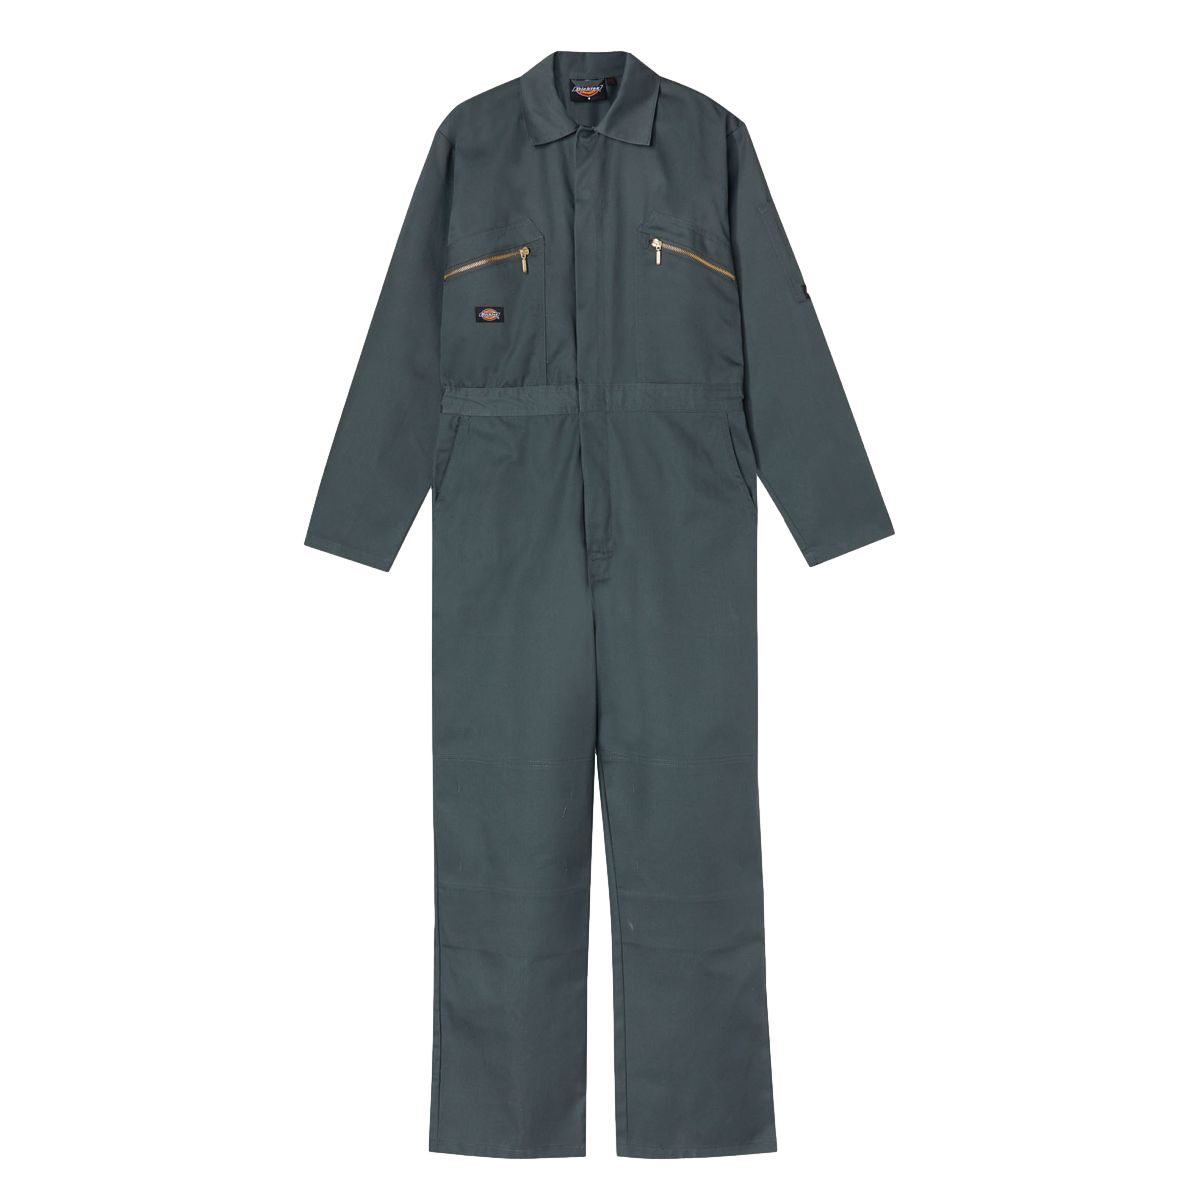 Combinaison Redhawk Coverhall Vert - Dickies - Taille L 0